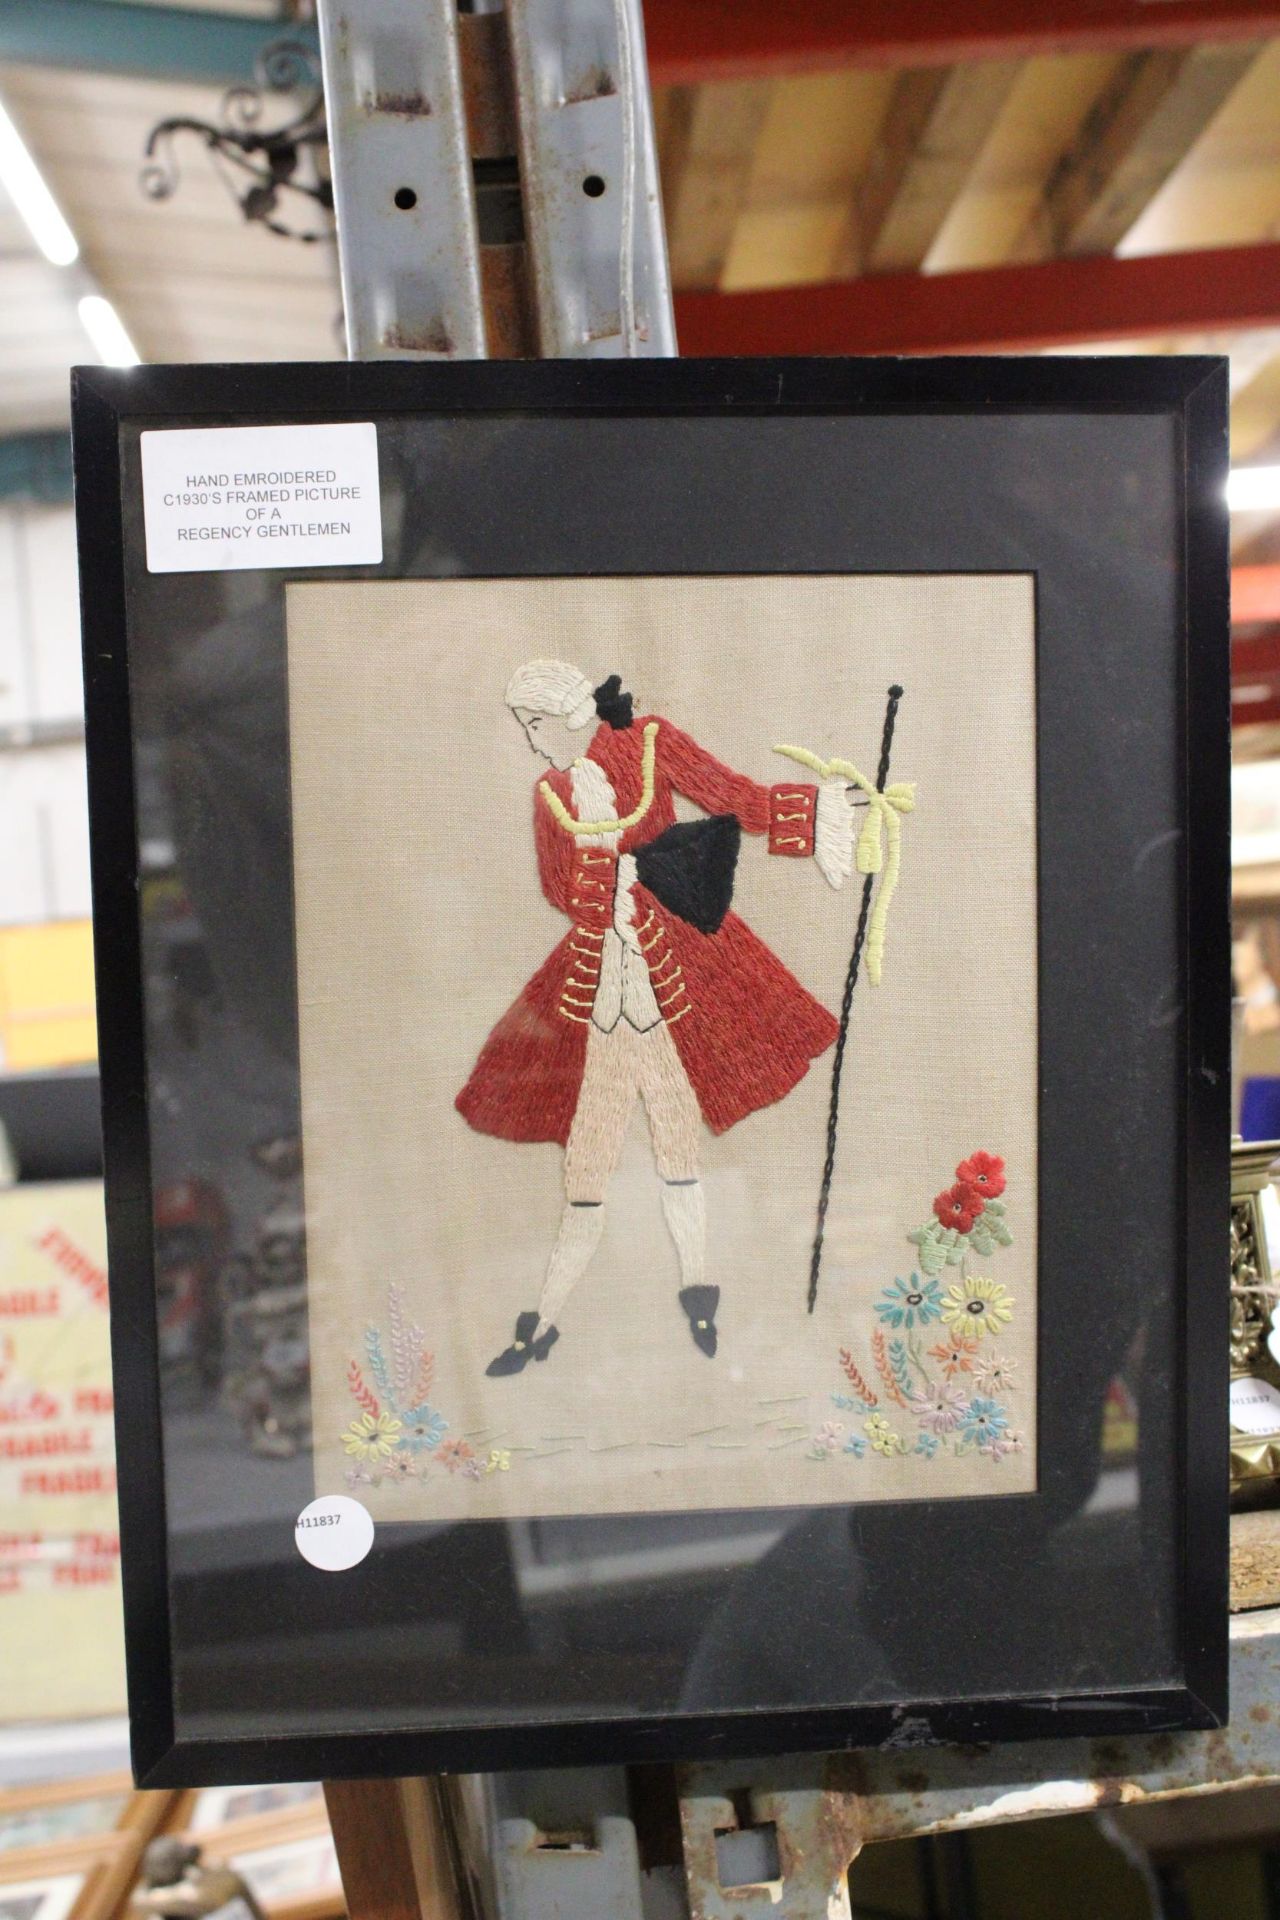 A HAND EMBROIDERED CIRCA 1930'S FRAMED PICTURE OF A REGENCY GENTLEMAN